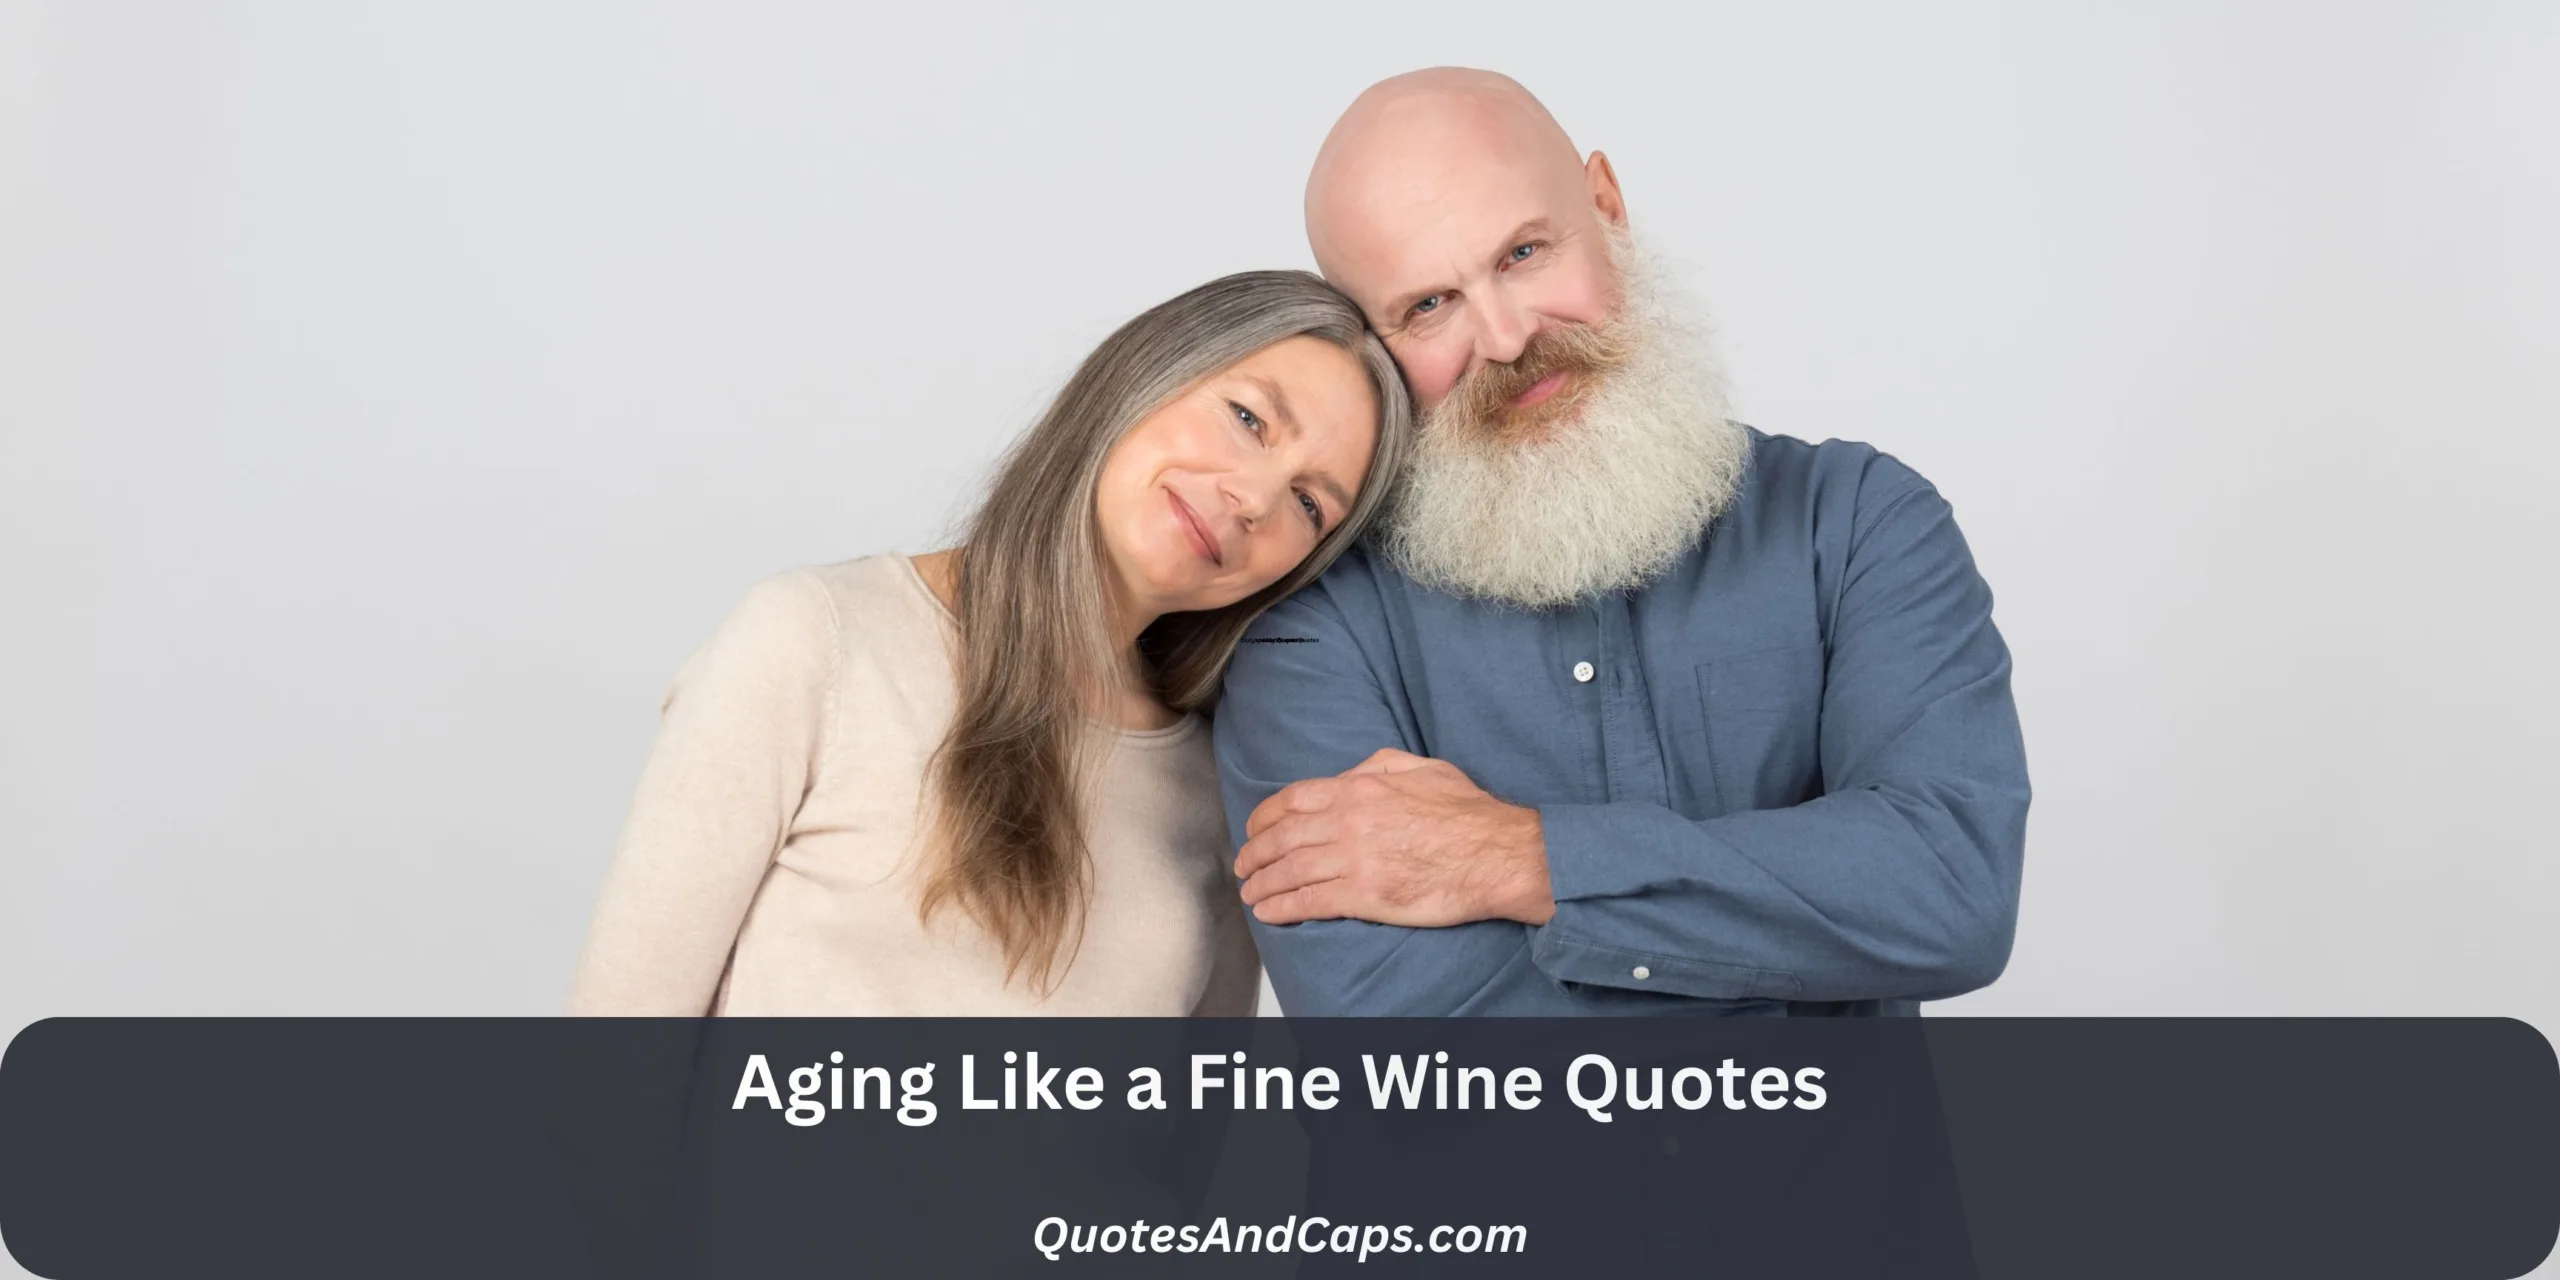 Aging Like a Fine Wine Quotes